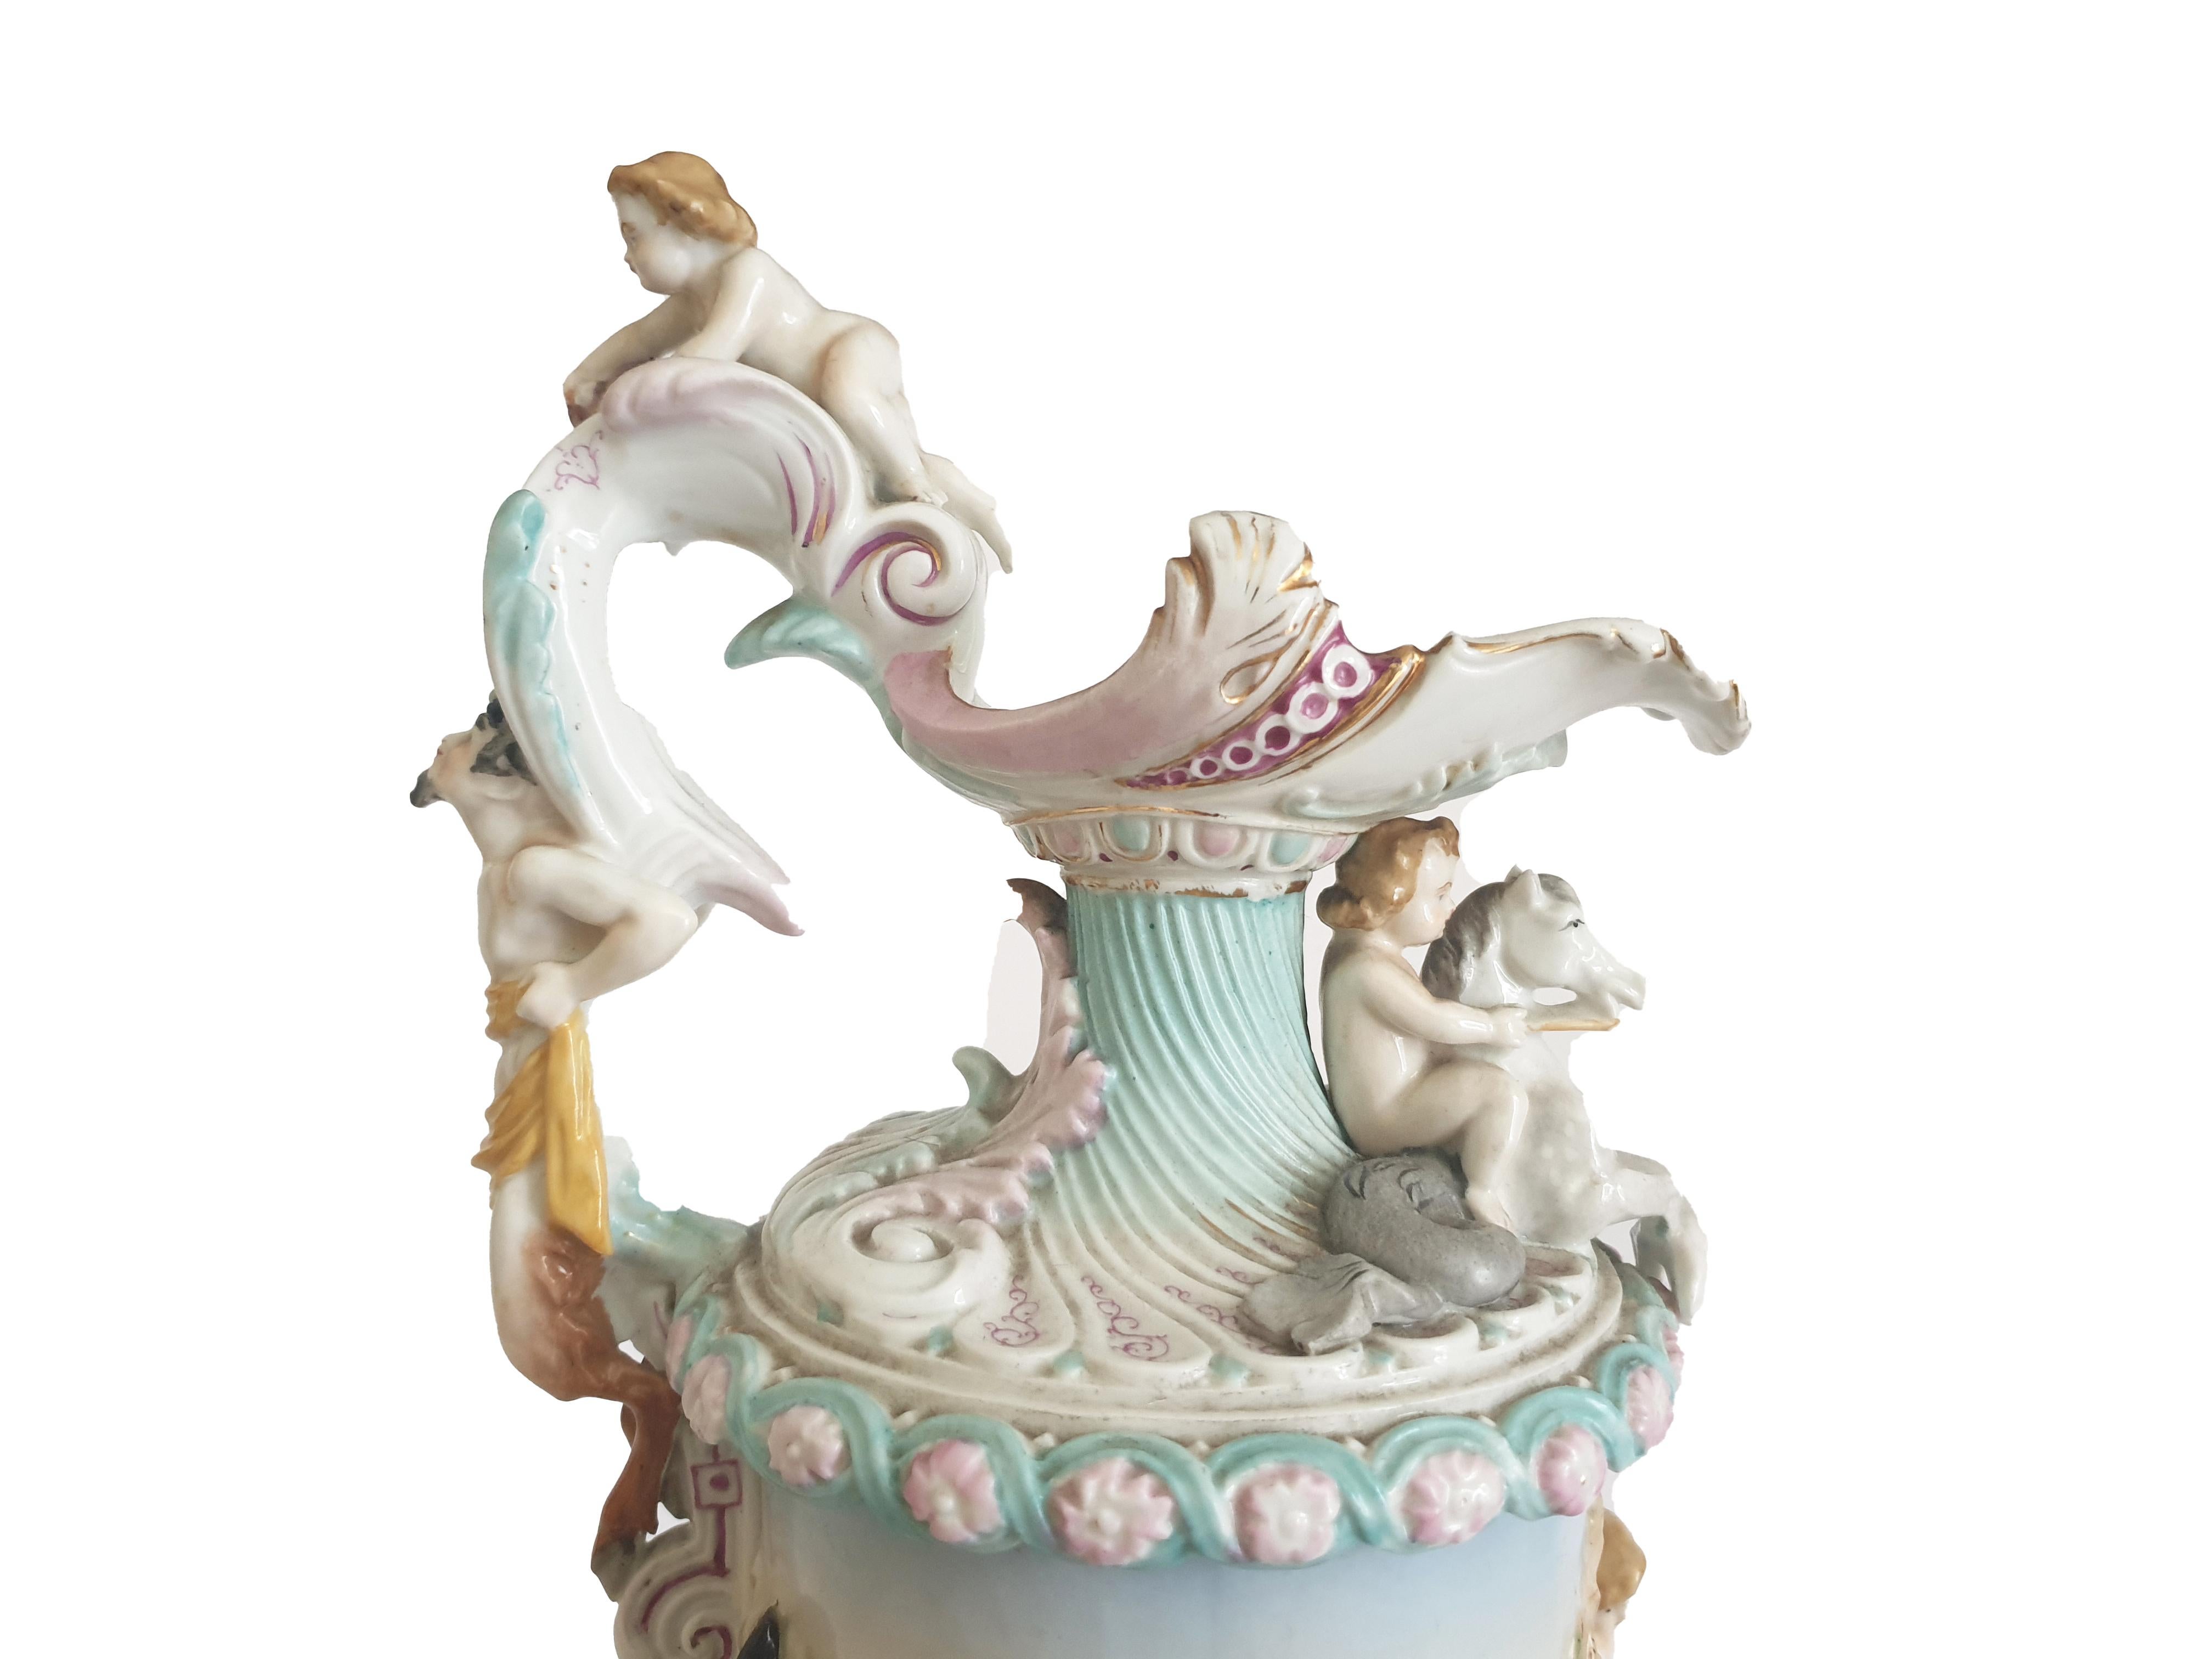 This beautiful antique Porcelain Figural Ewer is handcrafted by the Italian factory Capo de Monte and dates back to around circa 1900's. 
The ewer is elaborately and profusely modeled in the Capo de Monte palette and this design features festive